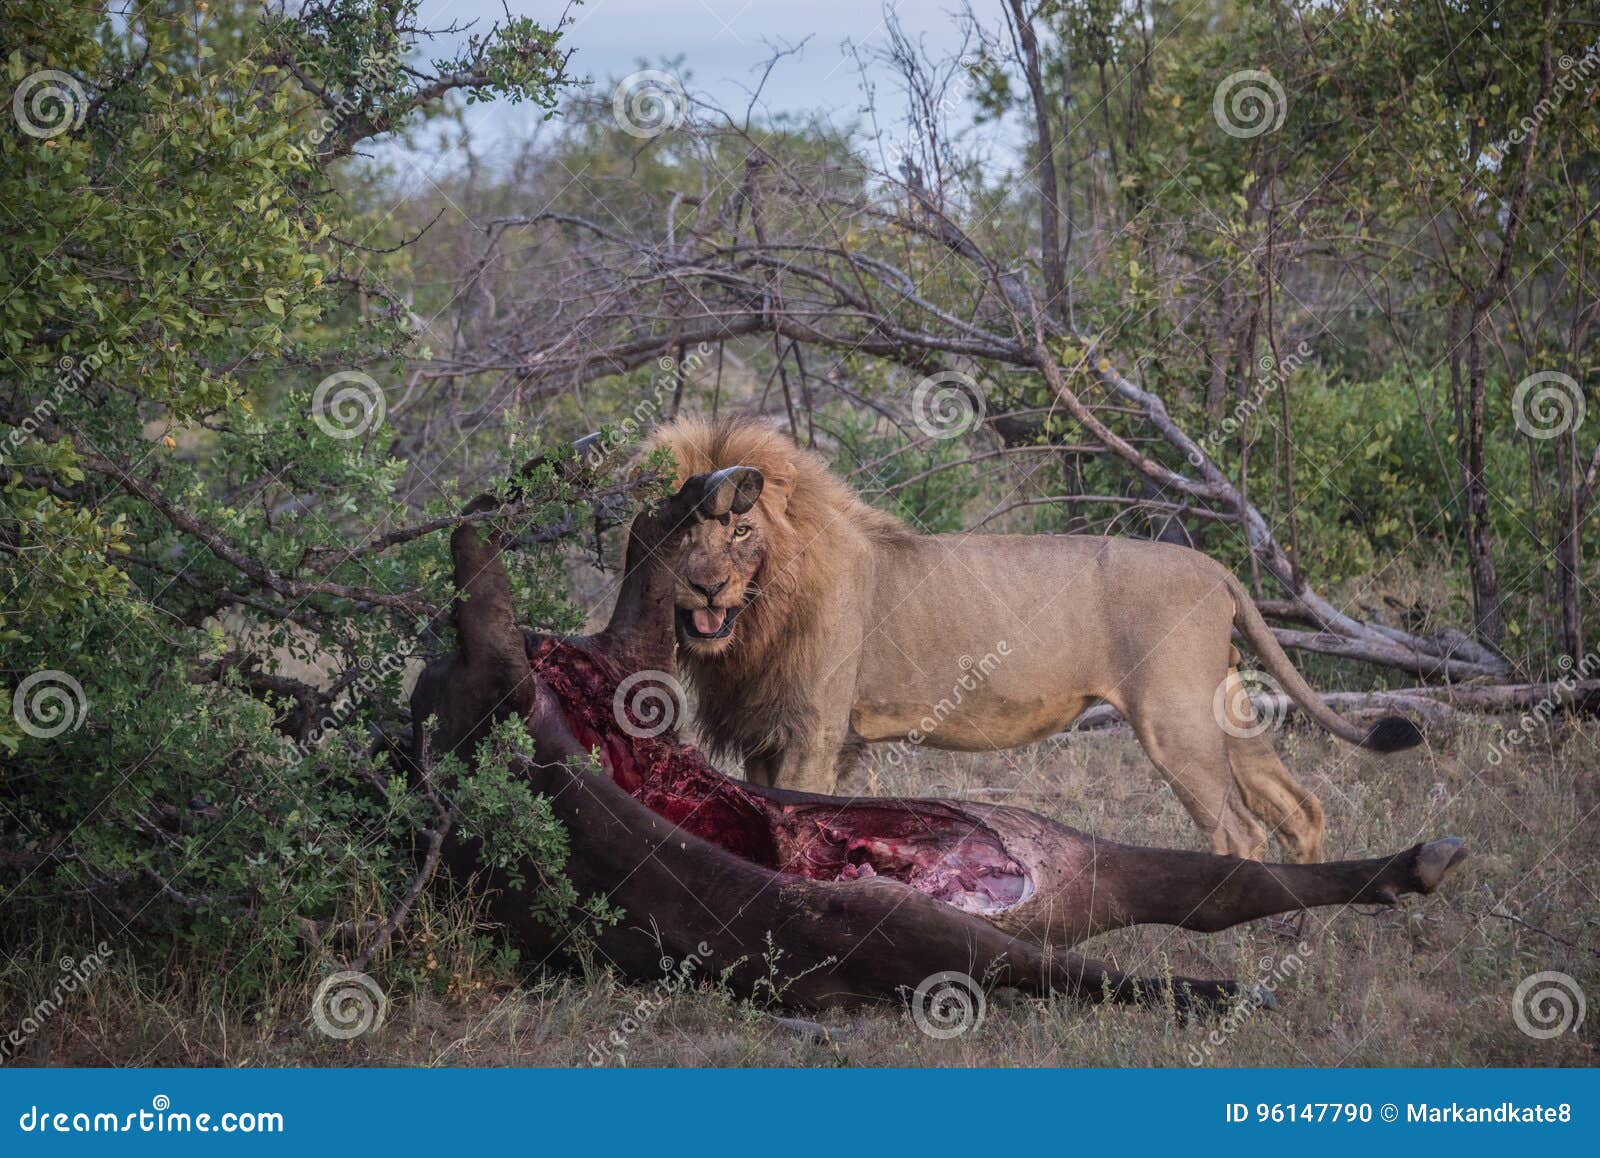 Male Lion with Kill - Image of eating, national: 96147790